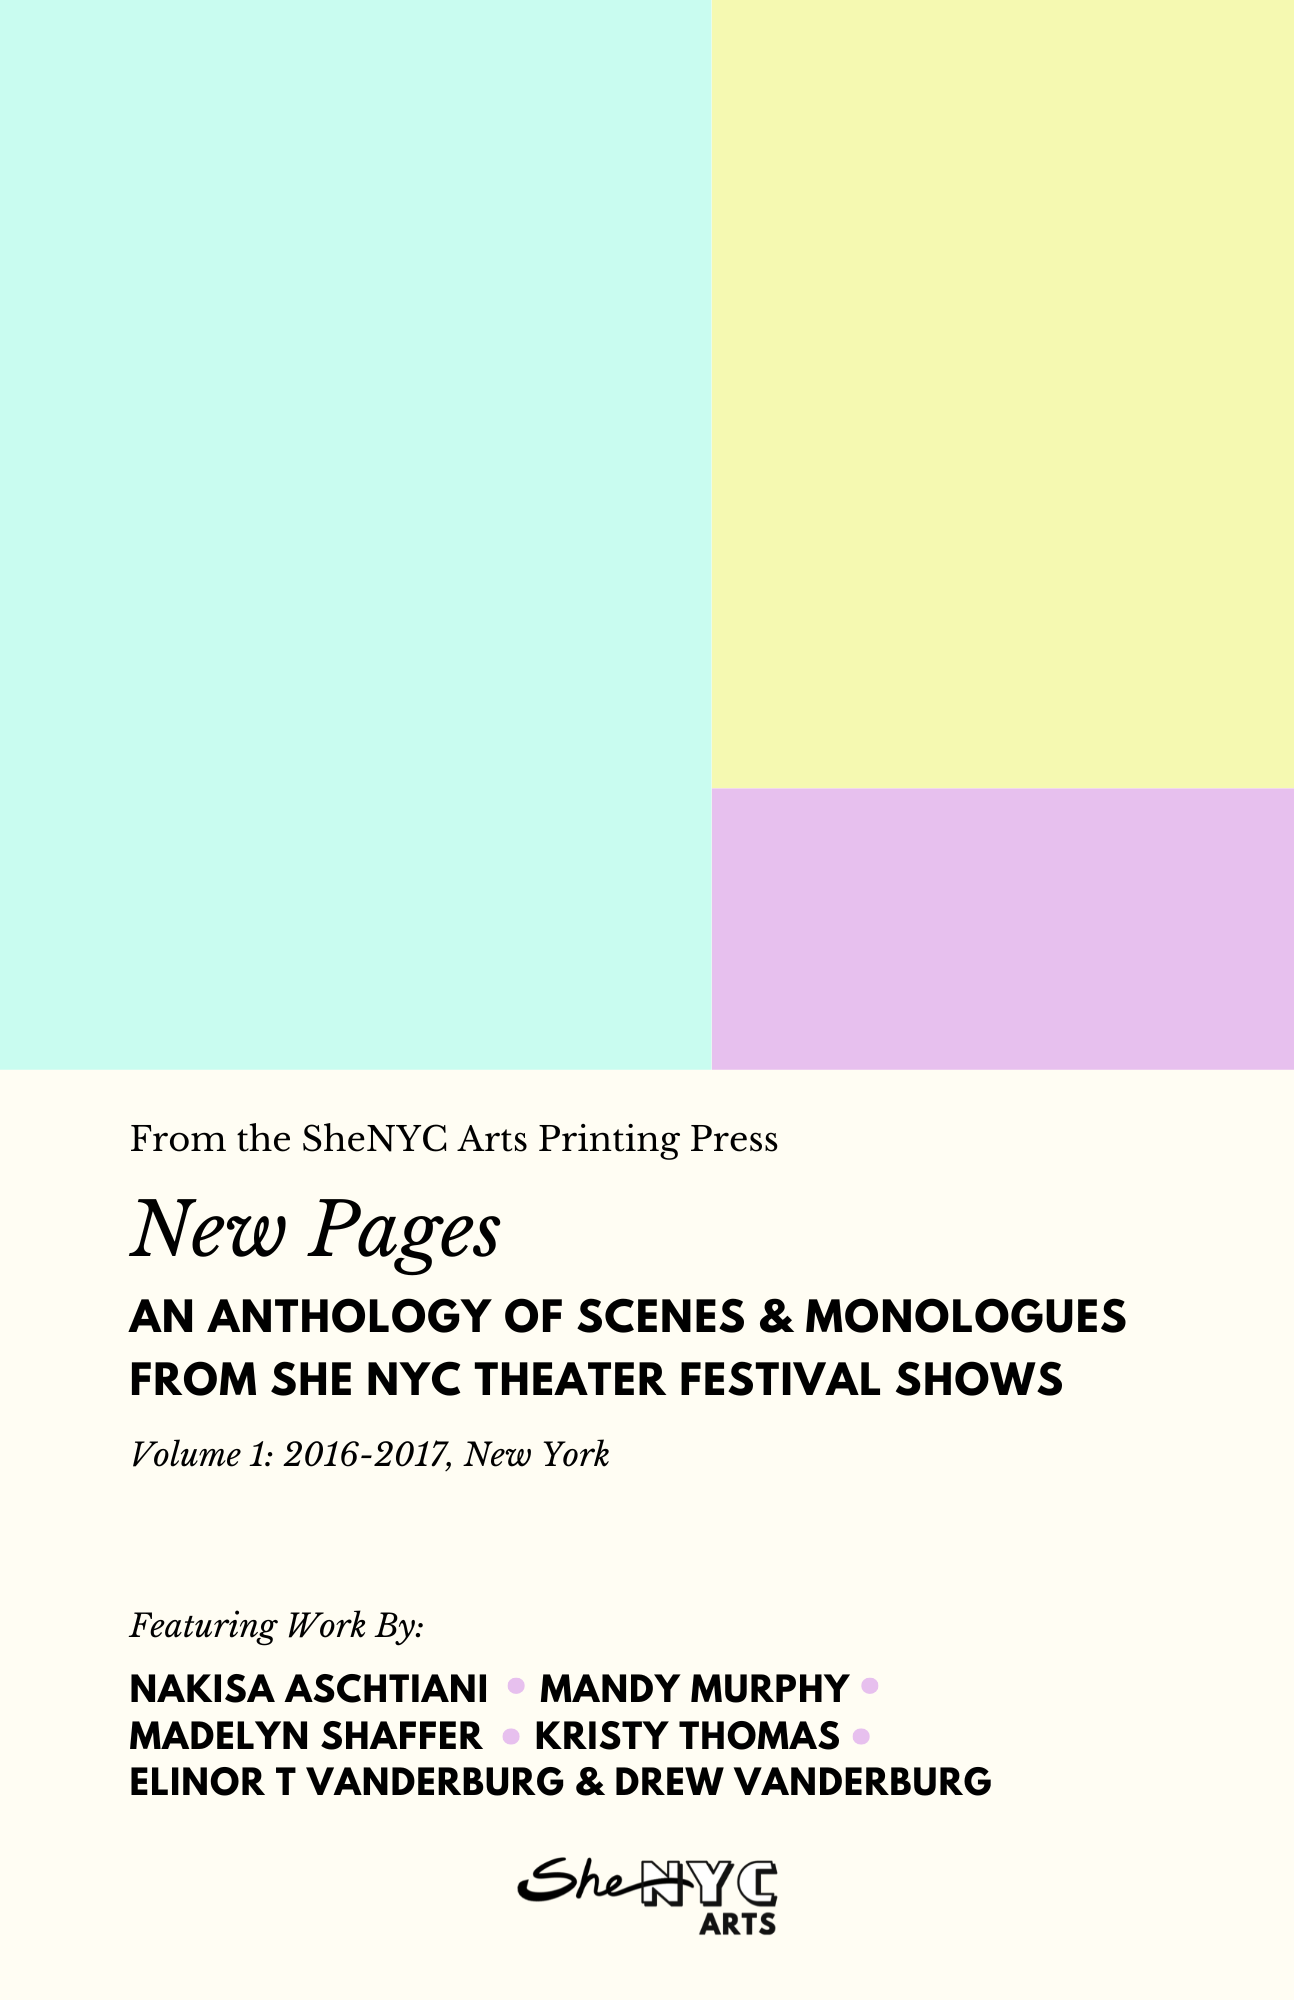 The front cover of the book: NEW PAGES, an anthology of scenes and monologues by She NYC Theater Festival Shows. Volume 1.